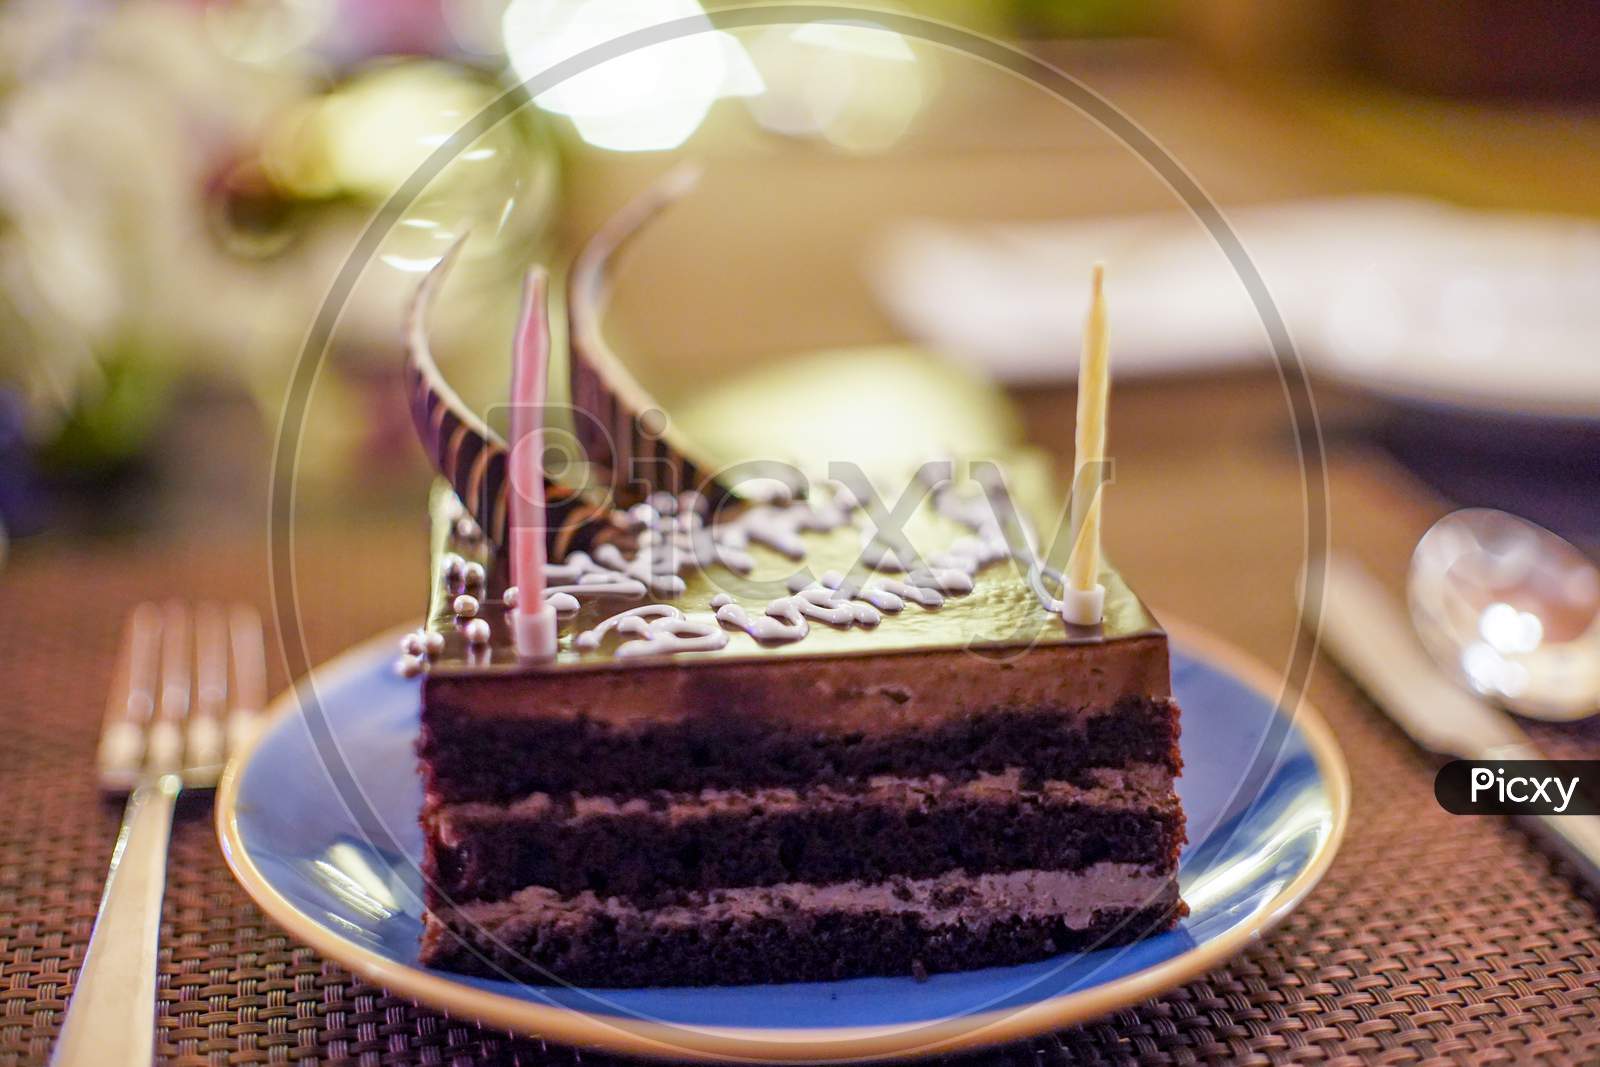 Shot Of Cake With Sparkling Candles With Flames And Sparks Flying Out With An Out Of Focus Background Of Flowers, Lights Showing A Birthday Celebration, Wedding Or An Anniversary